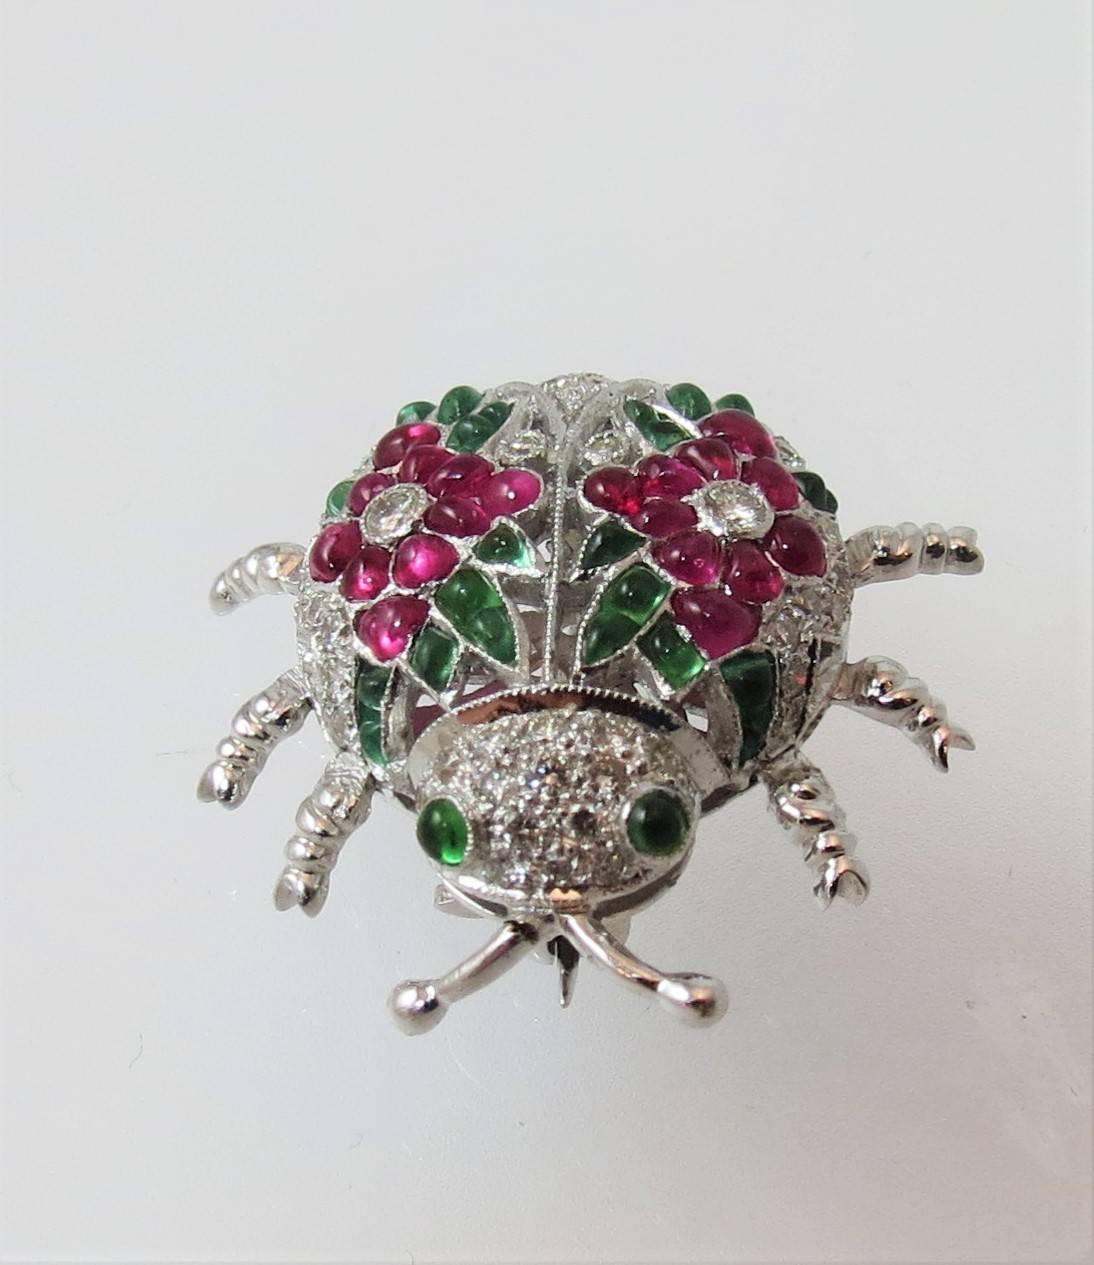 Fabulous 18K white gold beetle pin, set with 20 cabochon rubys, 28 cabochon emeralds, and 47 round diamonds about 1.20 cts, with adorable articulating legs.

One inch wide by one inch long